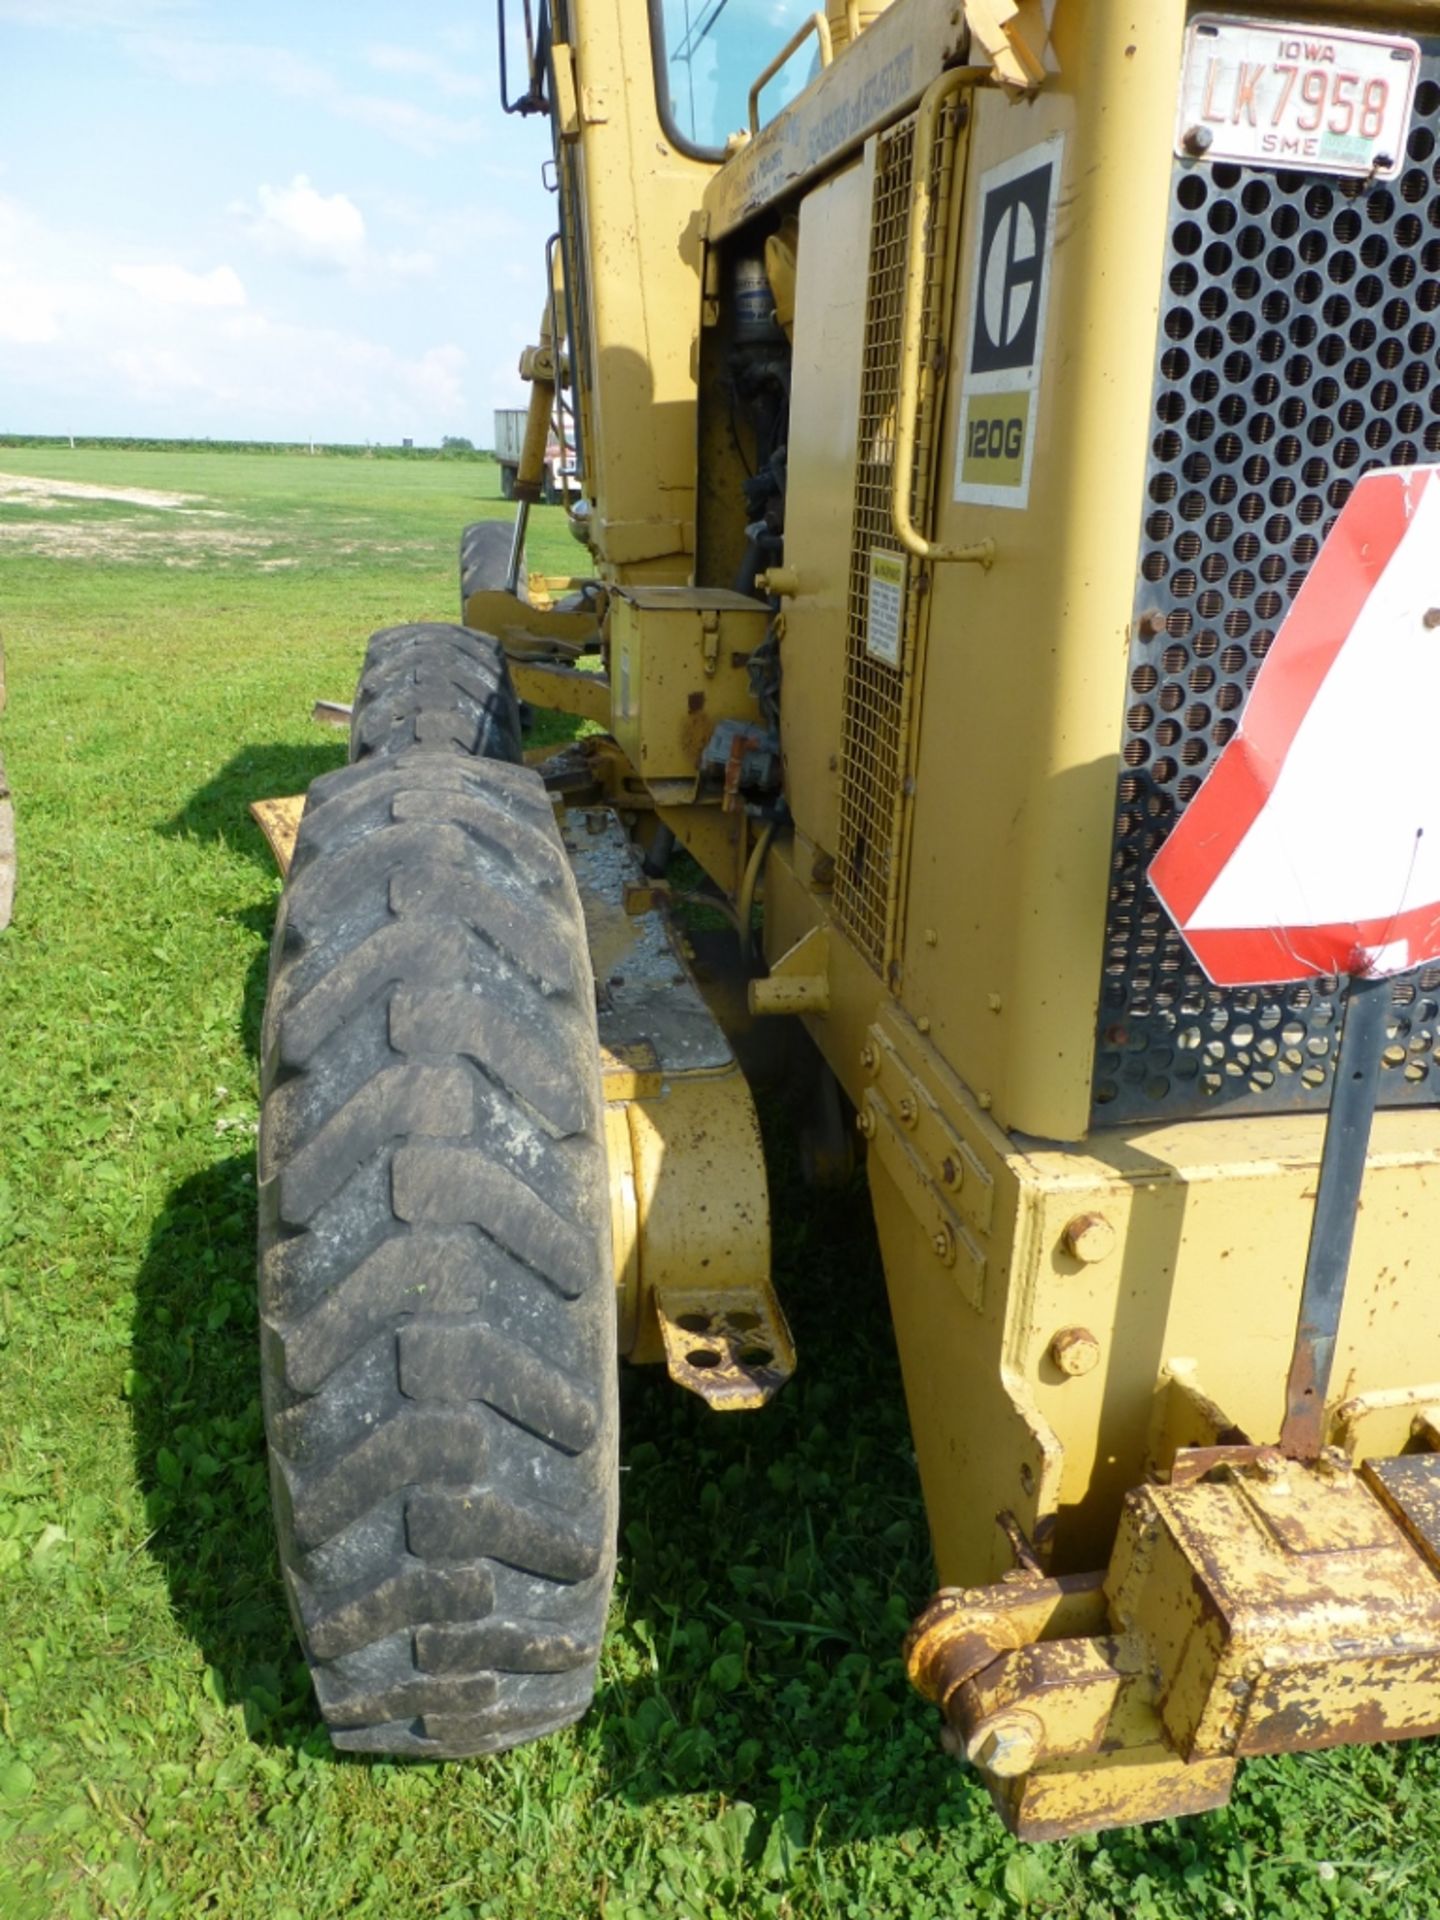 Caterpillar 120G motor grader with 13'10" moldboard se:87v871. Power shift. 7720 unverified hrs. - Image 6 of 27